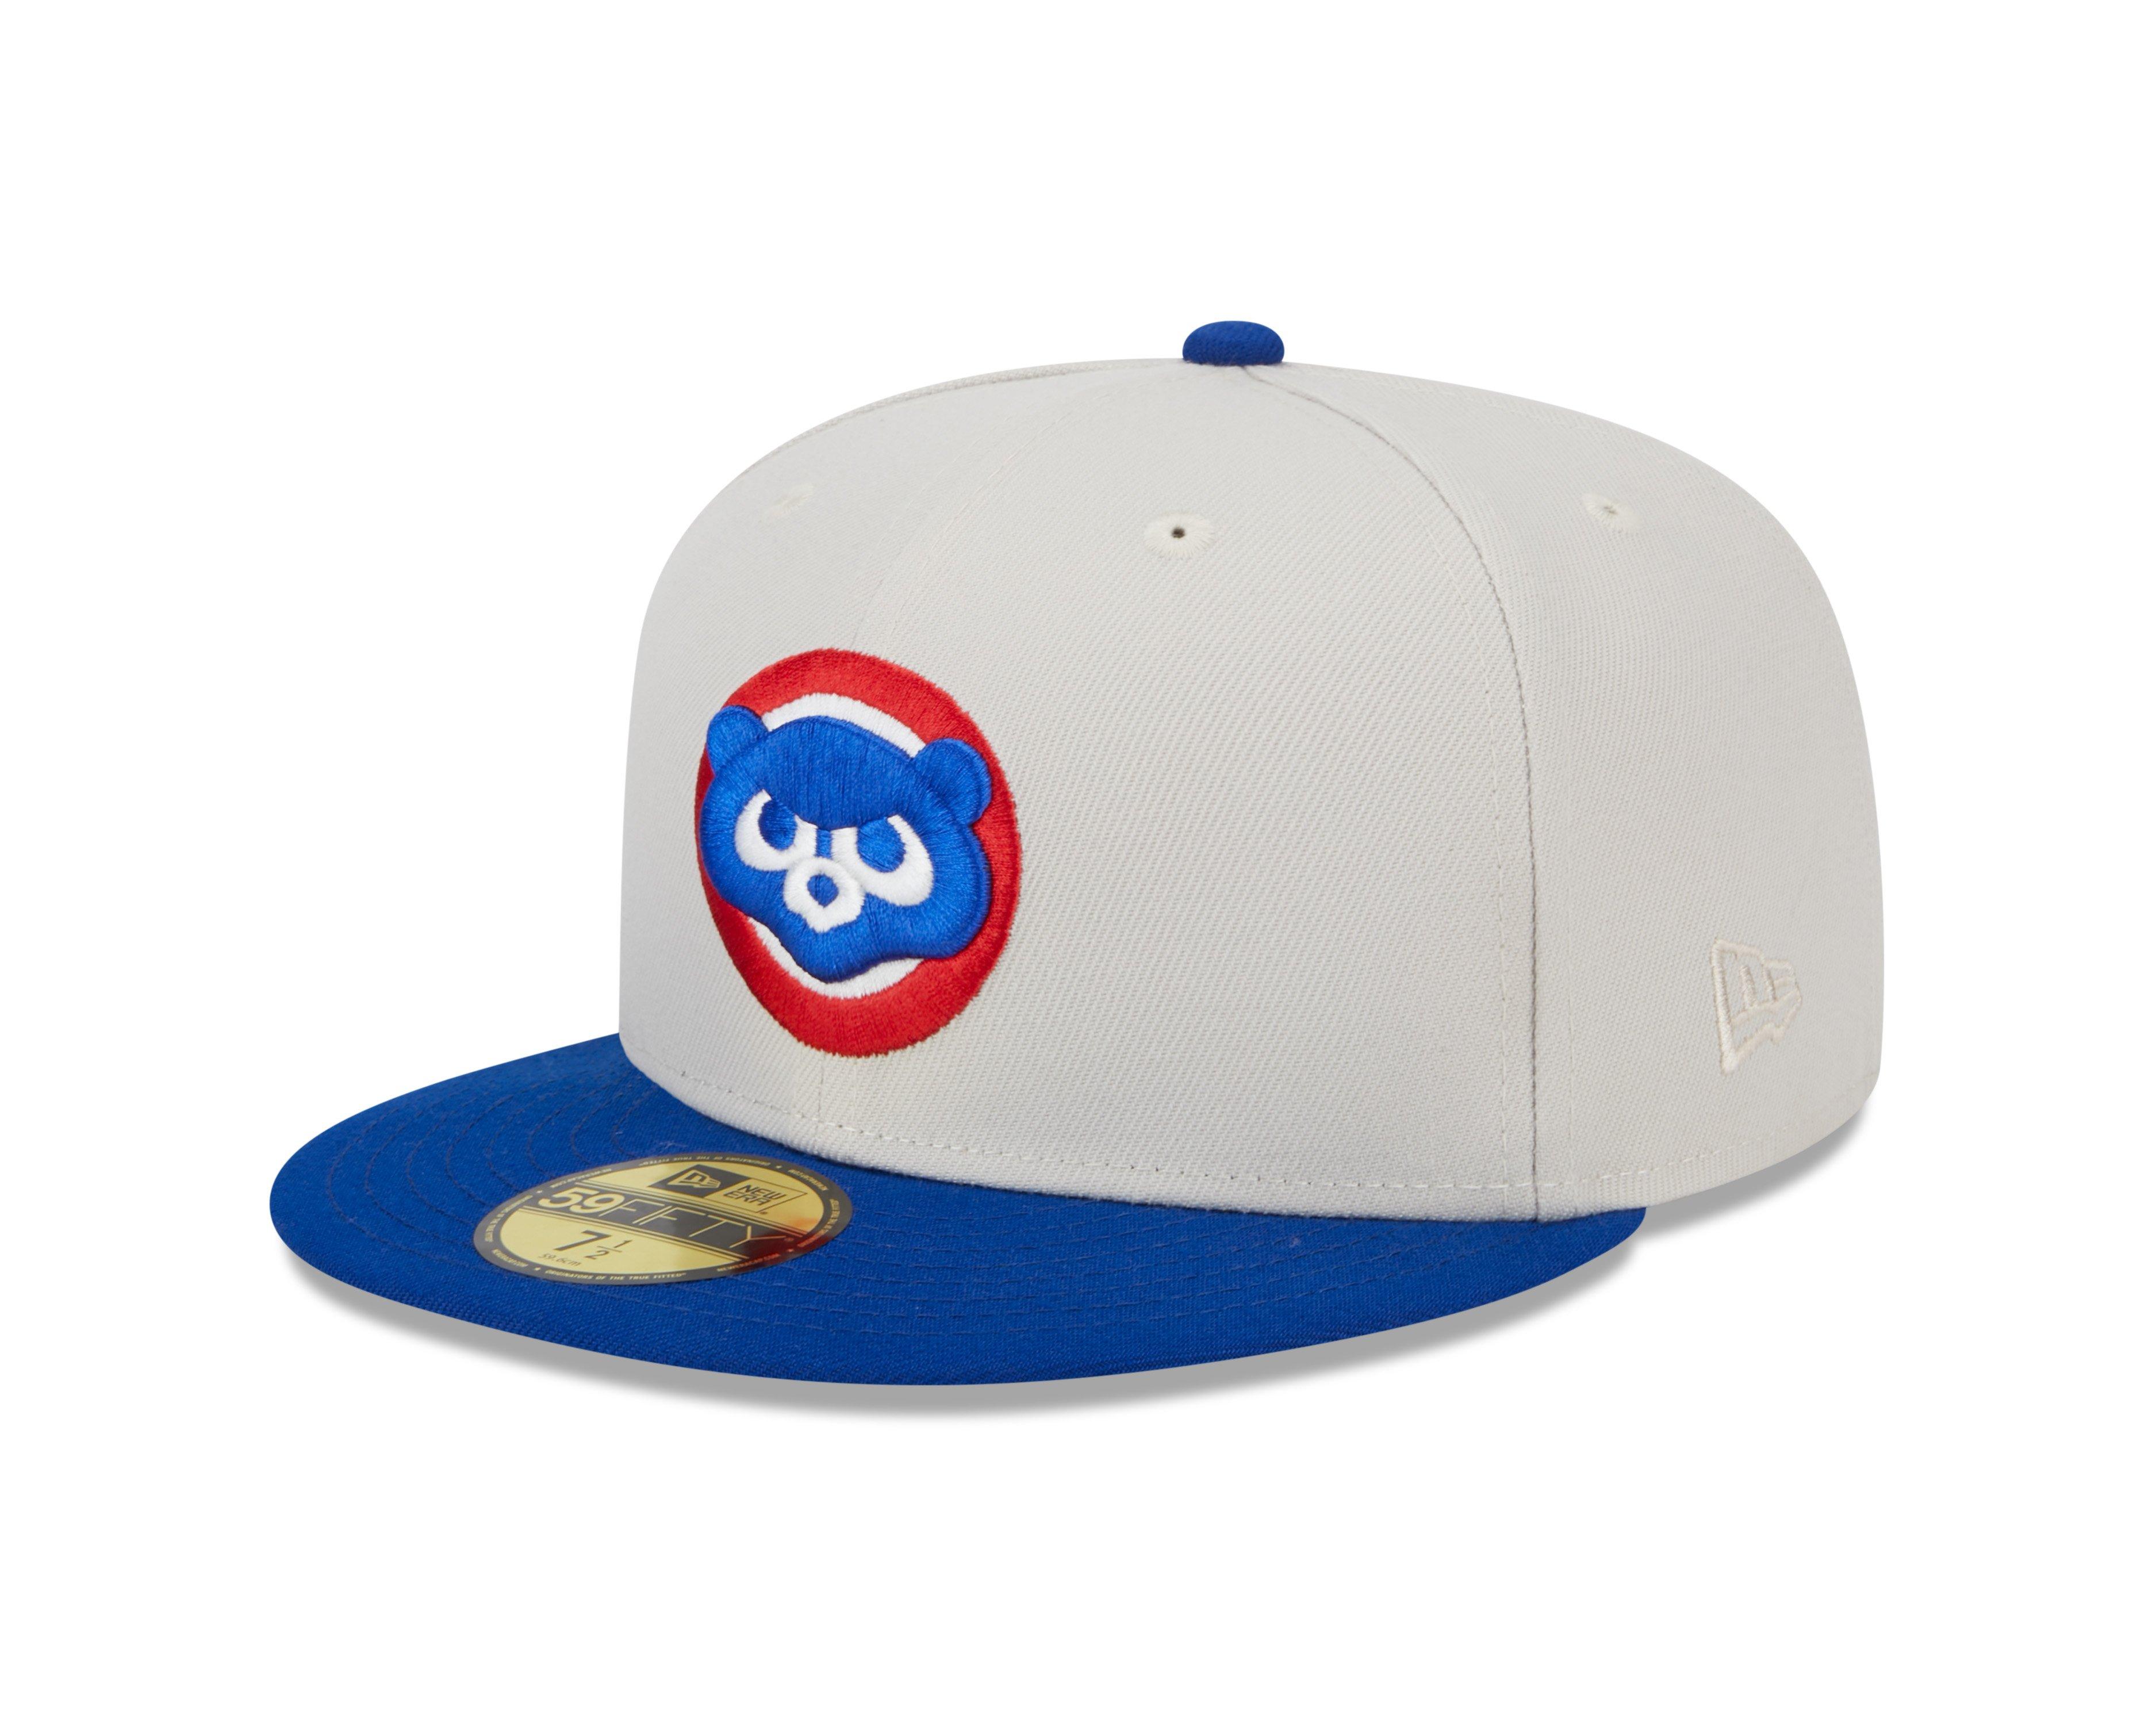 Official Chicago Cubs Gear, Cubs Jerseys, Store, Chicago Pro Shop